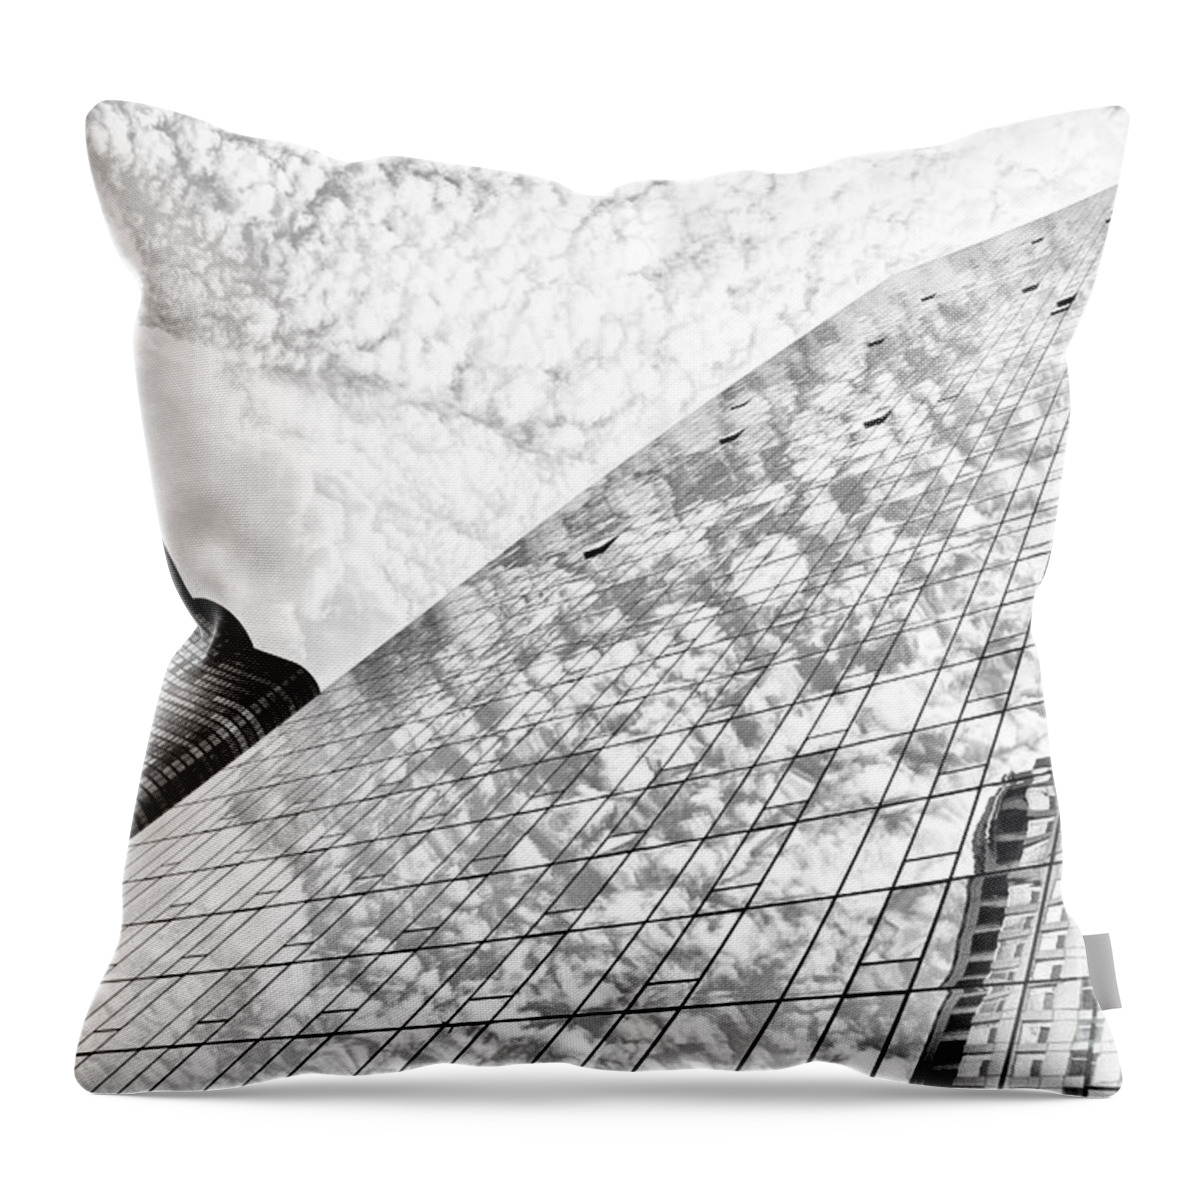 Building Throw Pillow featuring the photograph Window Pane by Katherine Erickson